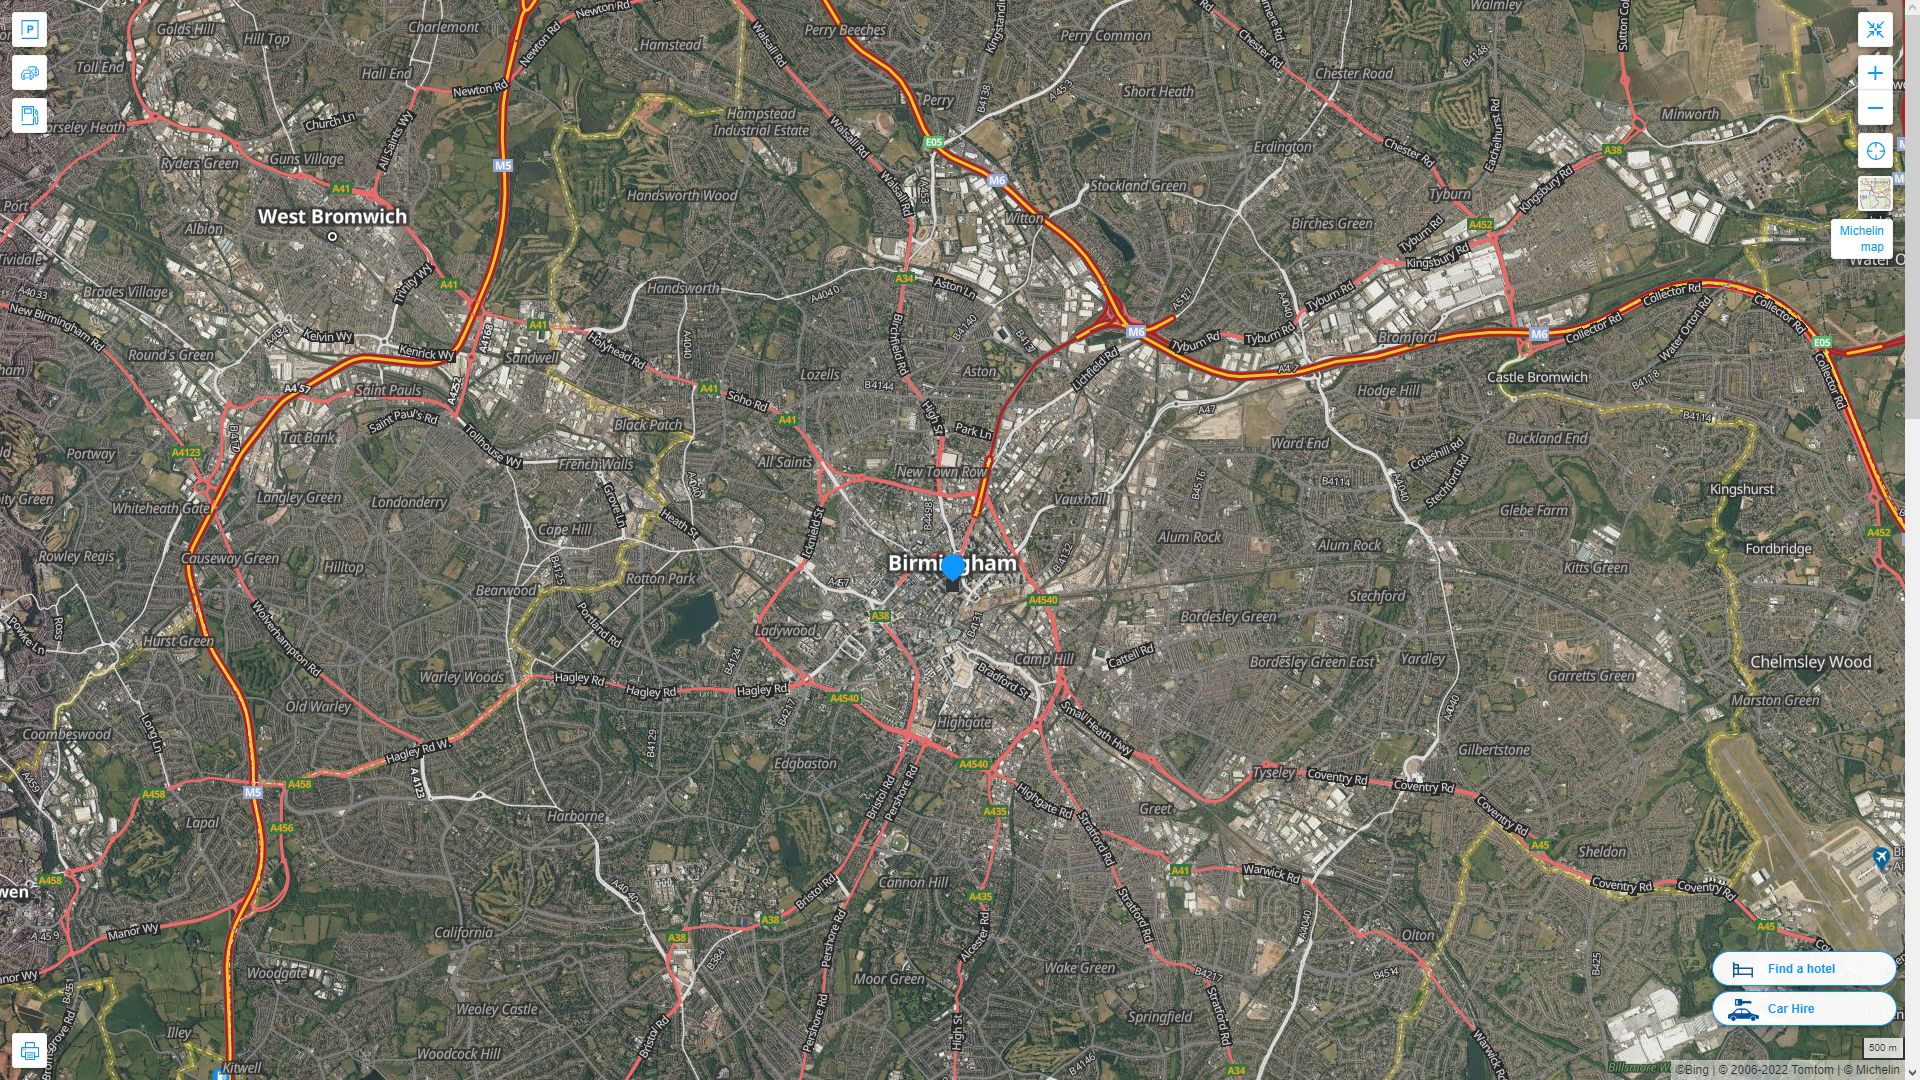 Birmingham Highway and Road Map with Satellite View